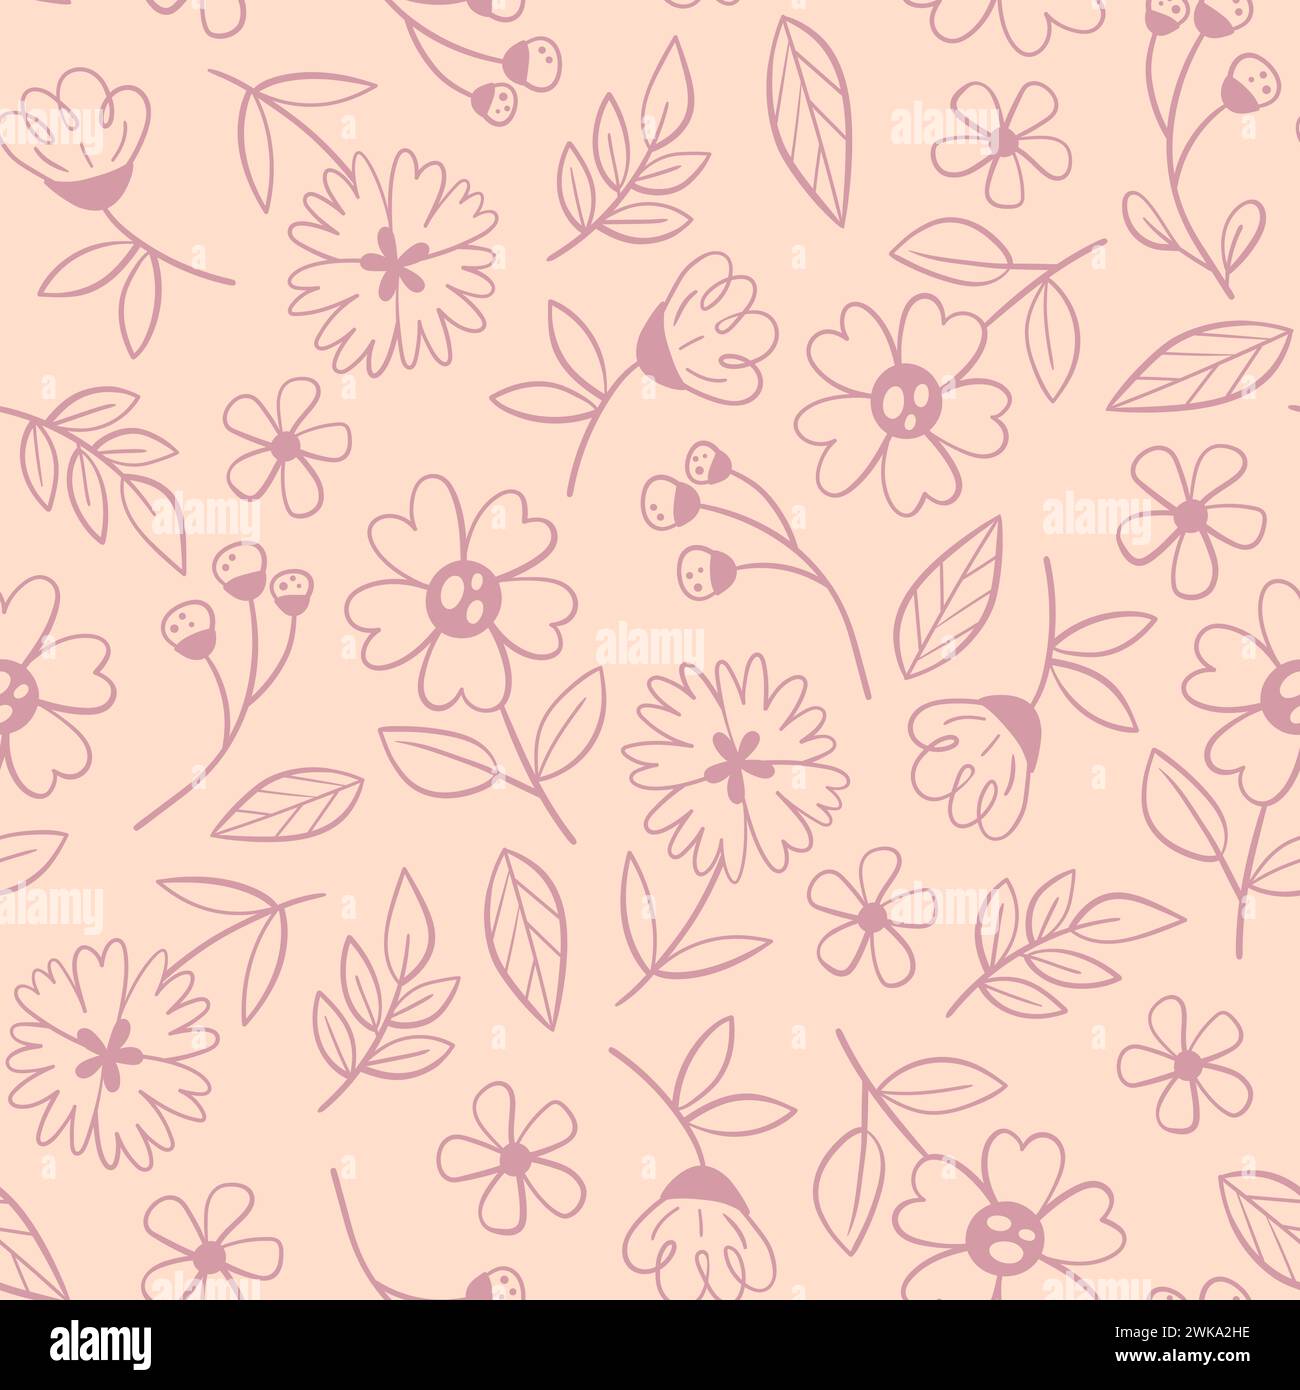 Floral seamless pattern in warm light tones. Doodle style. Seamless pattern with line art flowers. Vector illustration. Stock Vector